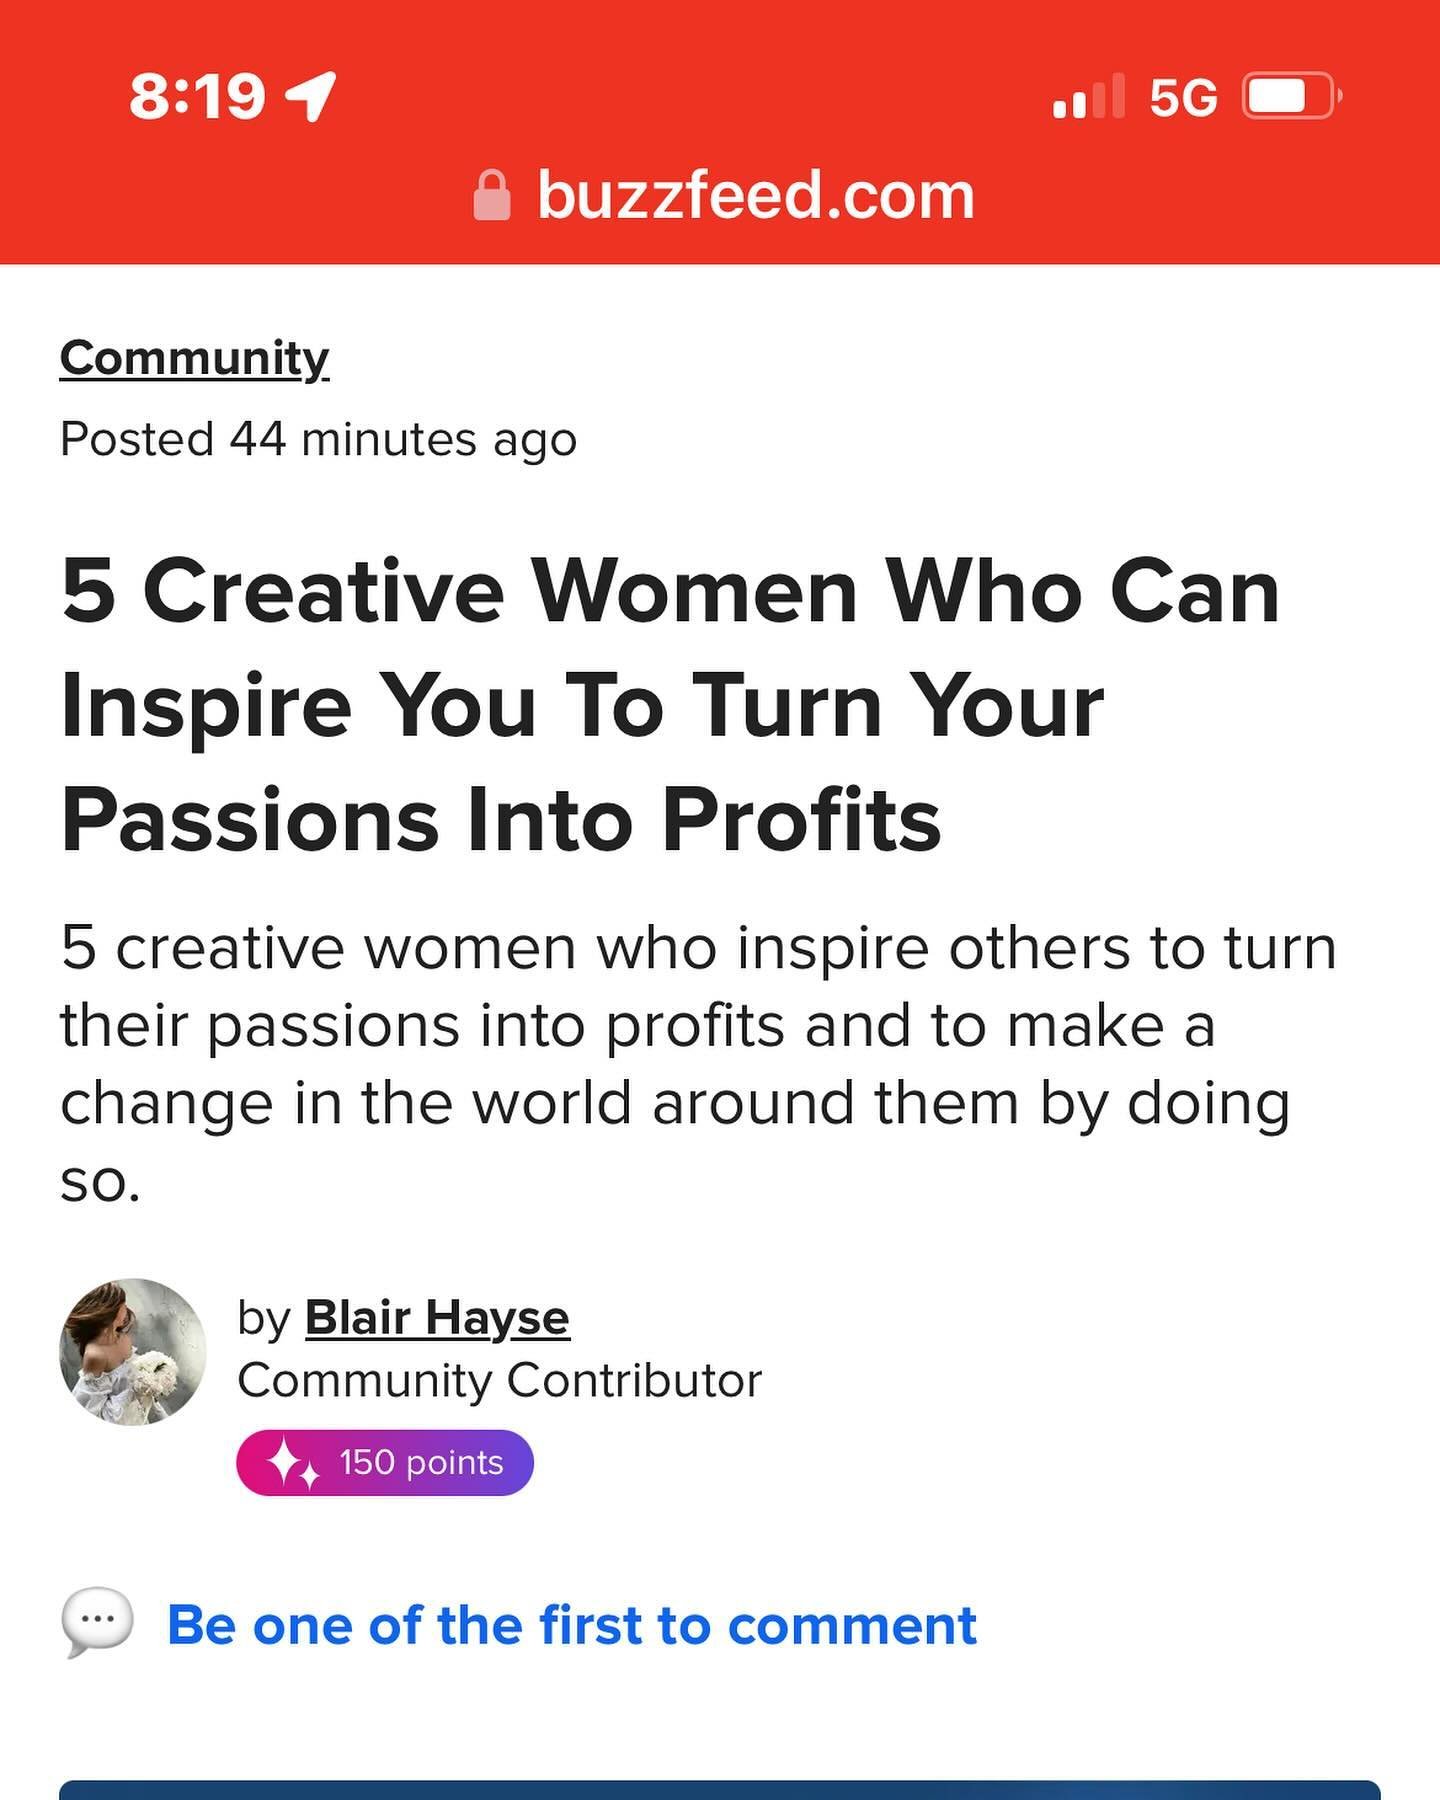 Once upon a time I pitched myself for a buzzfeed feature about 24 movers and shakers and then got surprised by Blair Hayse choosing me as one of &ldquo;5 Creative Women Who Can Inspire You To Turn Your Passions Into Profits.&rdquo;

Blair my hat is o